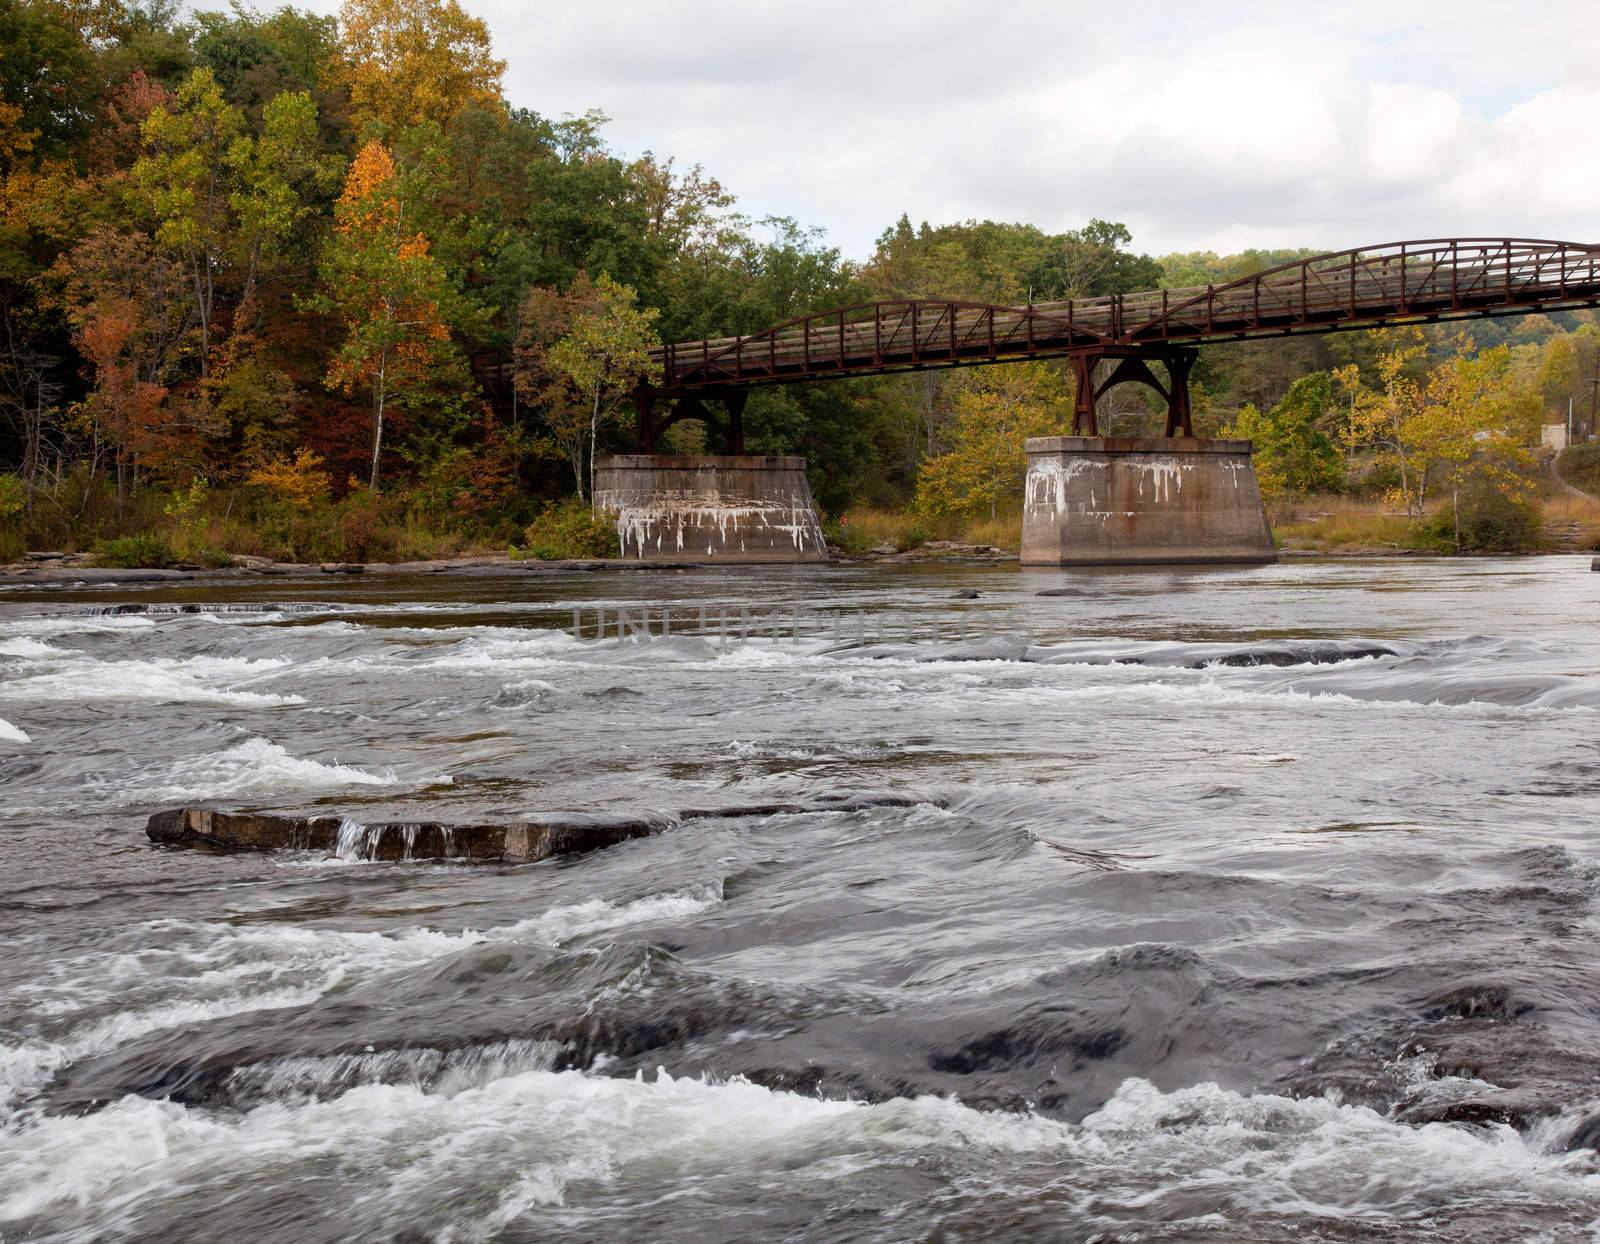 Ohiopyle in Pennsylvania on the Youghiogheny river in early fall